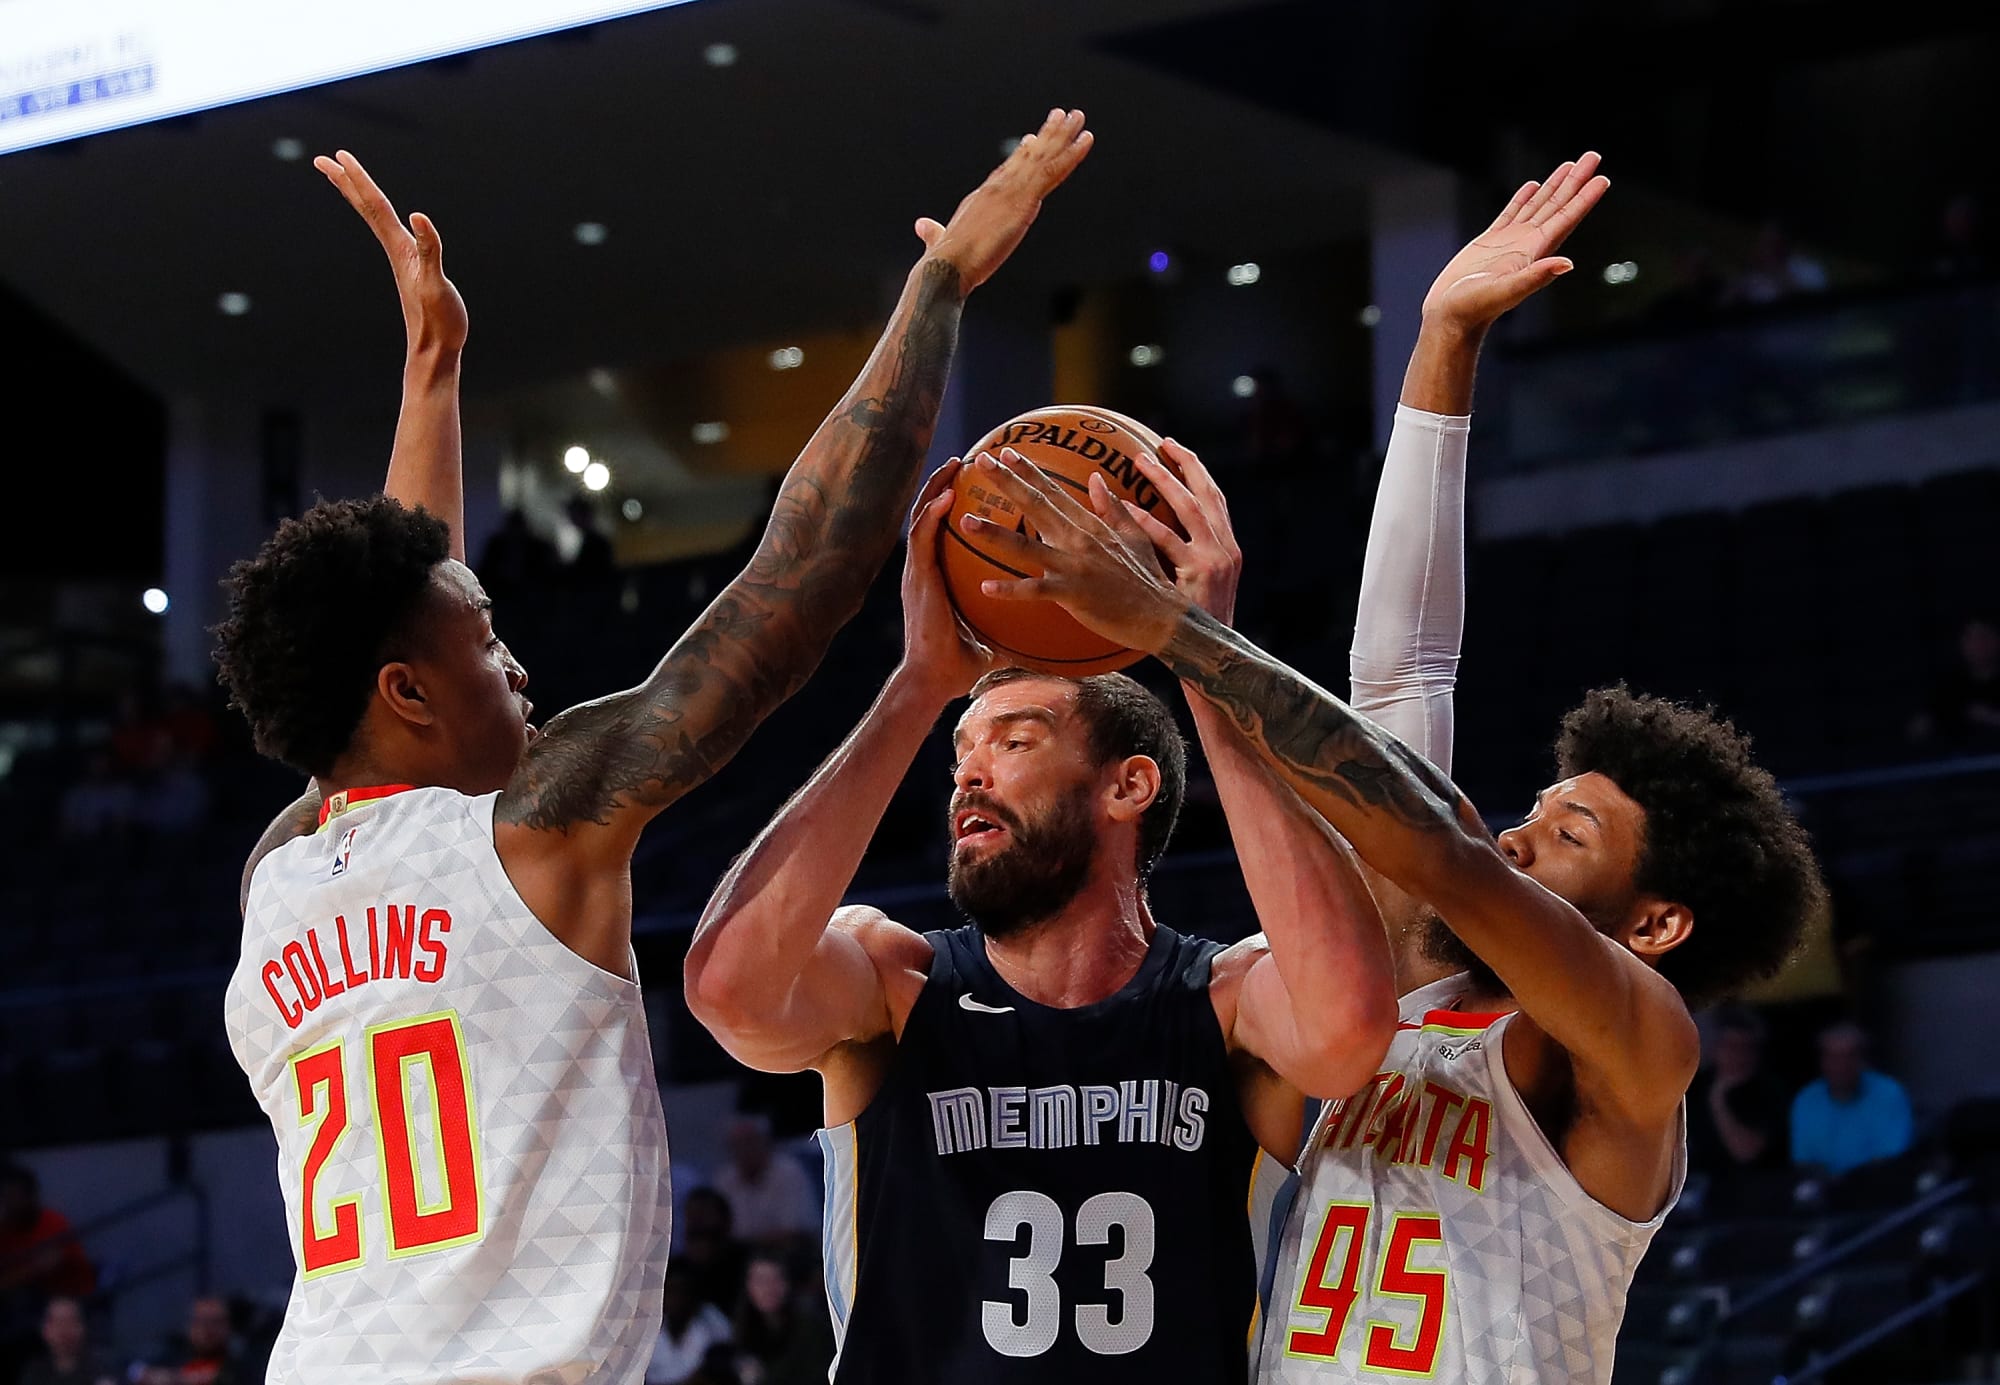 Postgame reaction from Atlanta Hawks victory over Memphis Grizzlies